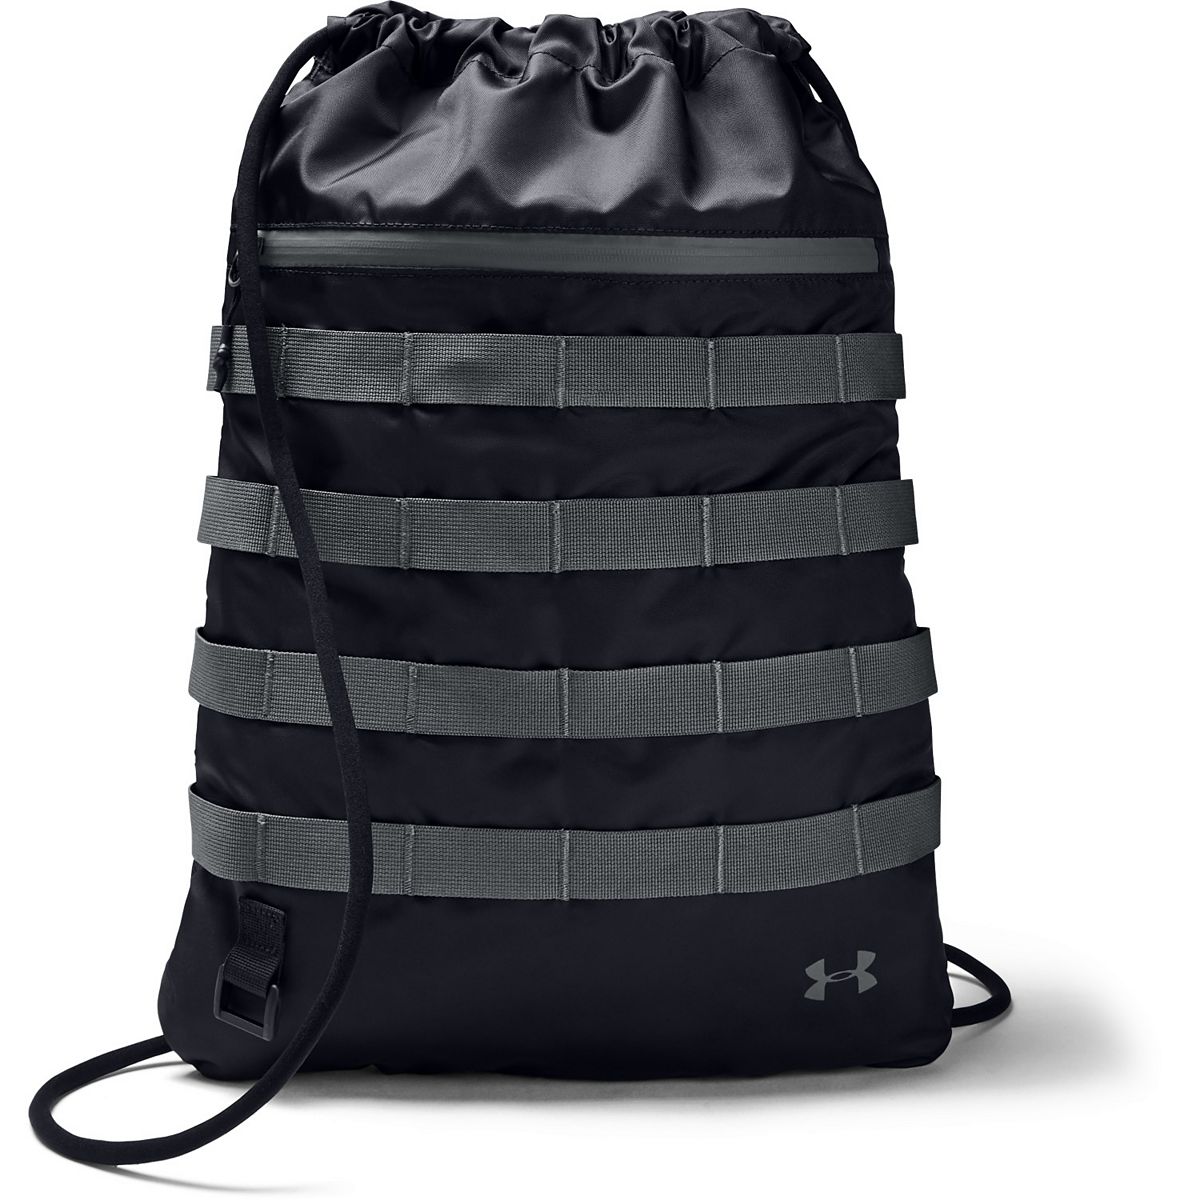 Under Armour, Bags, Under Armour Black Gym Drawstring Backpack Unisex